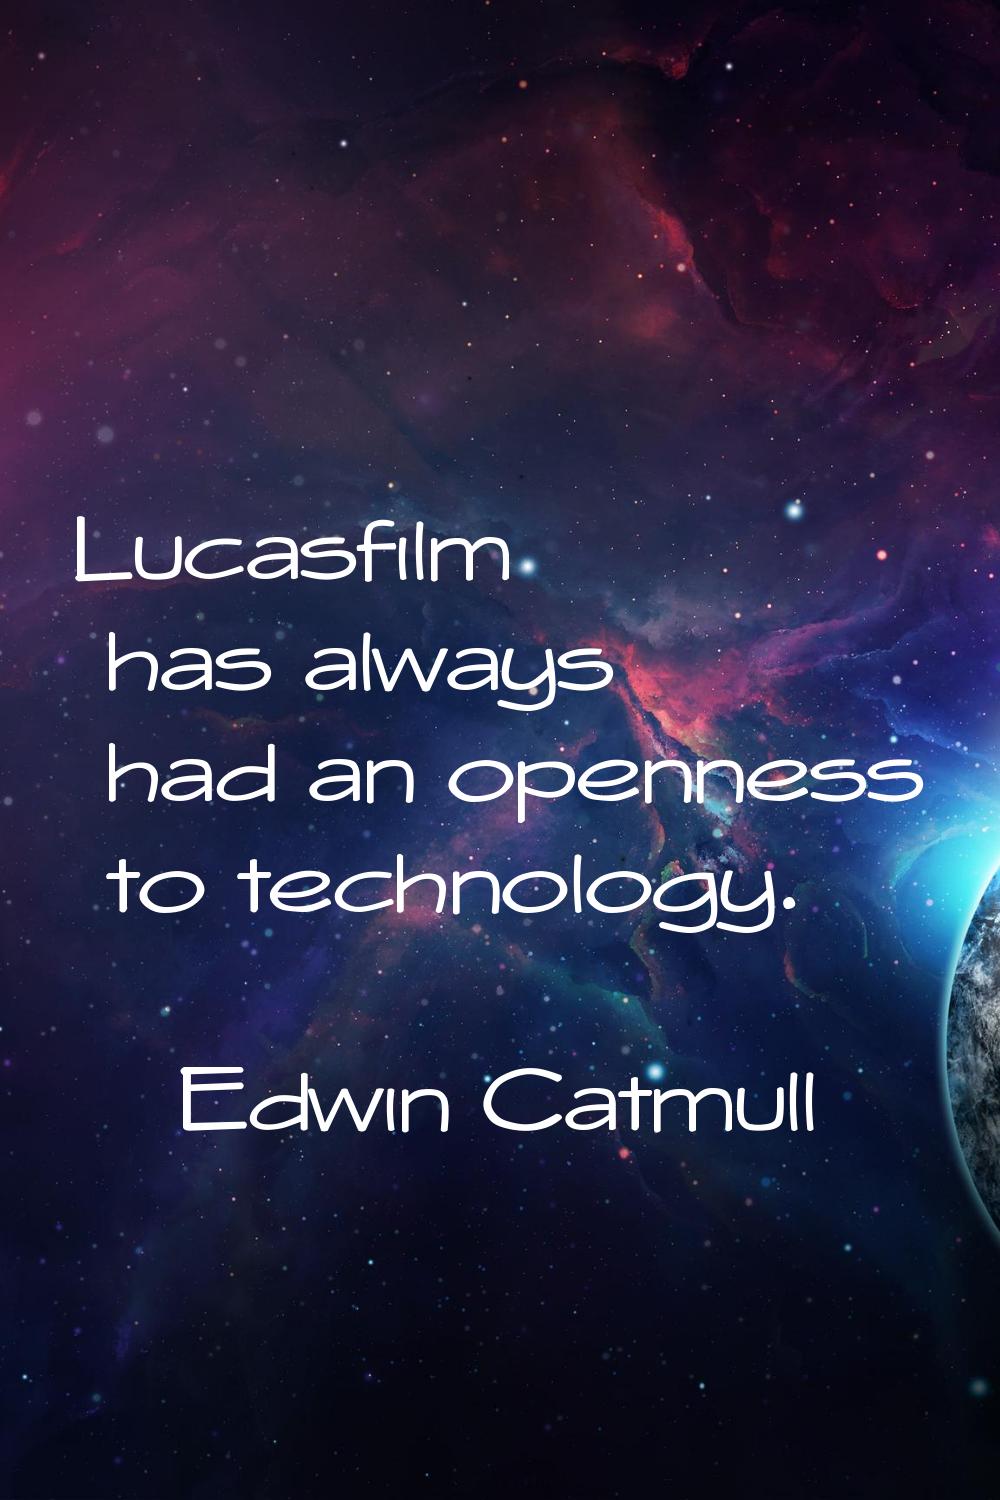 Lucasfilm has always had an openness to technology.